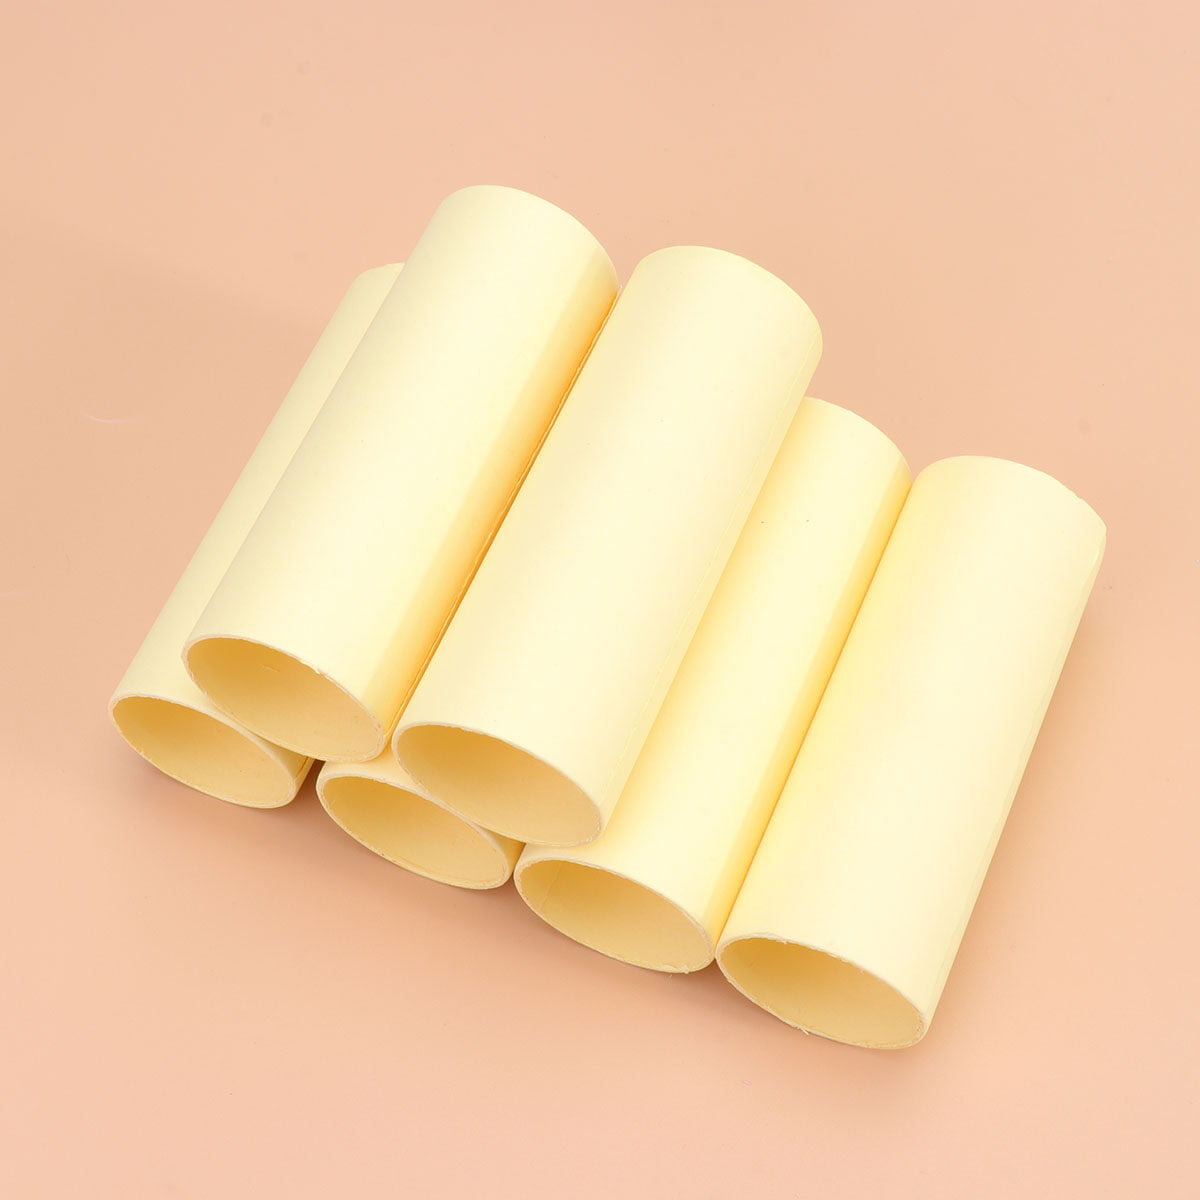 Tubeequeen Kraft Mailing Tubes with End Caps - Art Shipping Tubes 2-inch D  x 24-inch L, 12 Pack